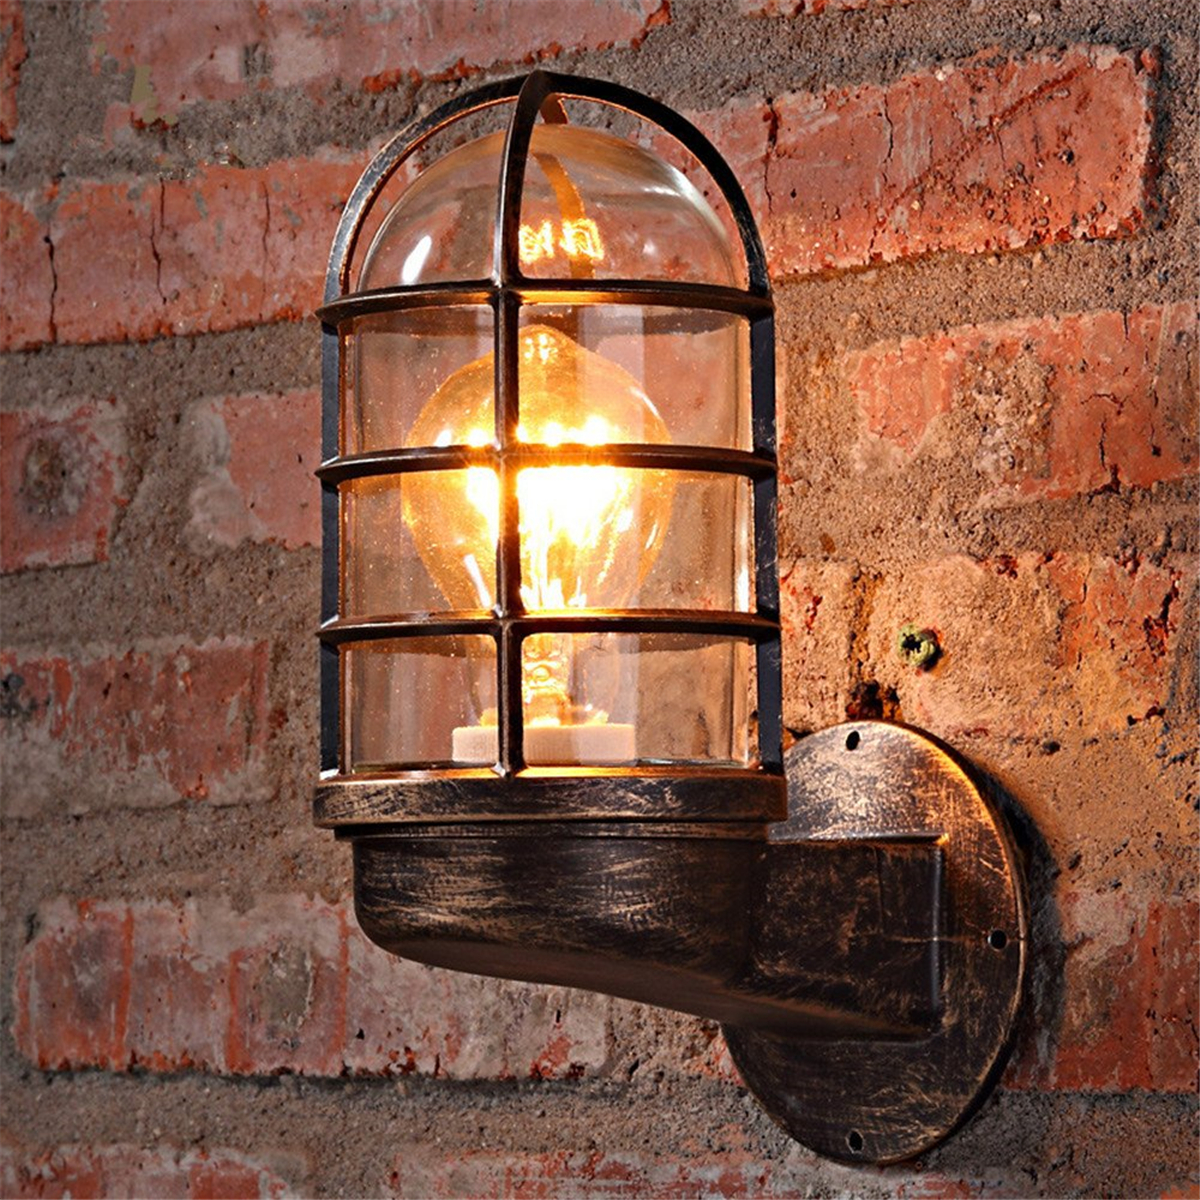 Vintage-Industrial-Unique-Wall-Lamp-Iron-Rustic-Copper-Steampunk-Lamp-Sconce-1635620-5